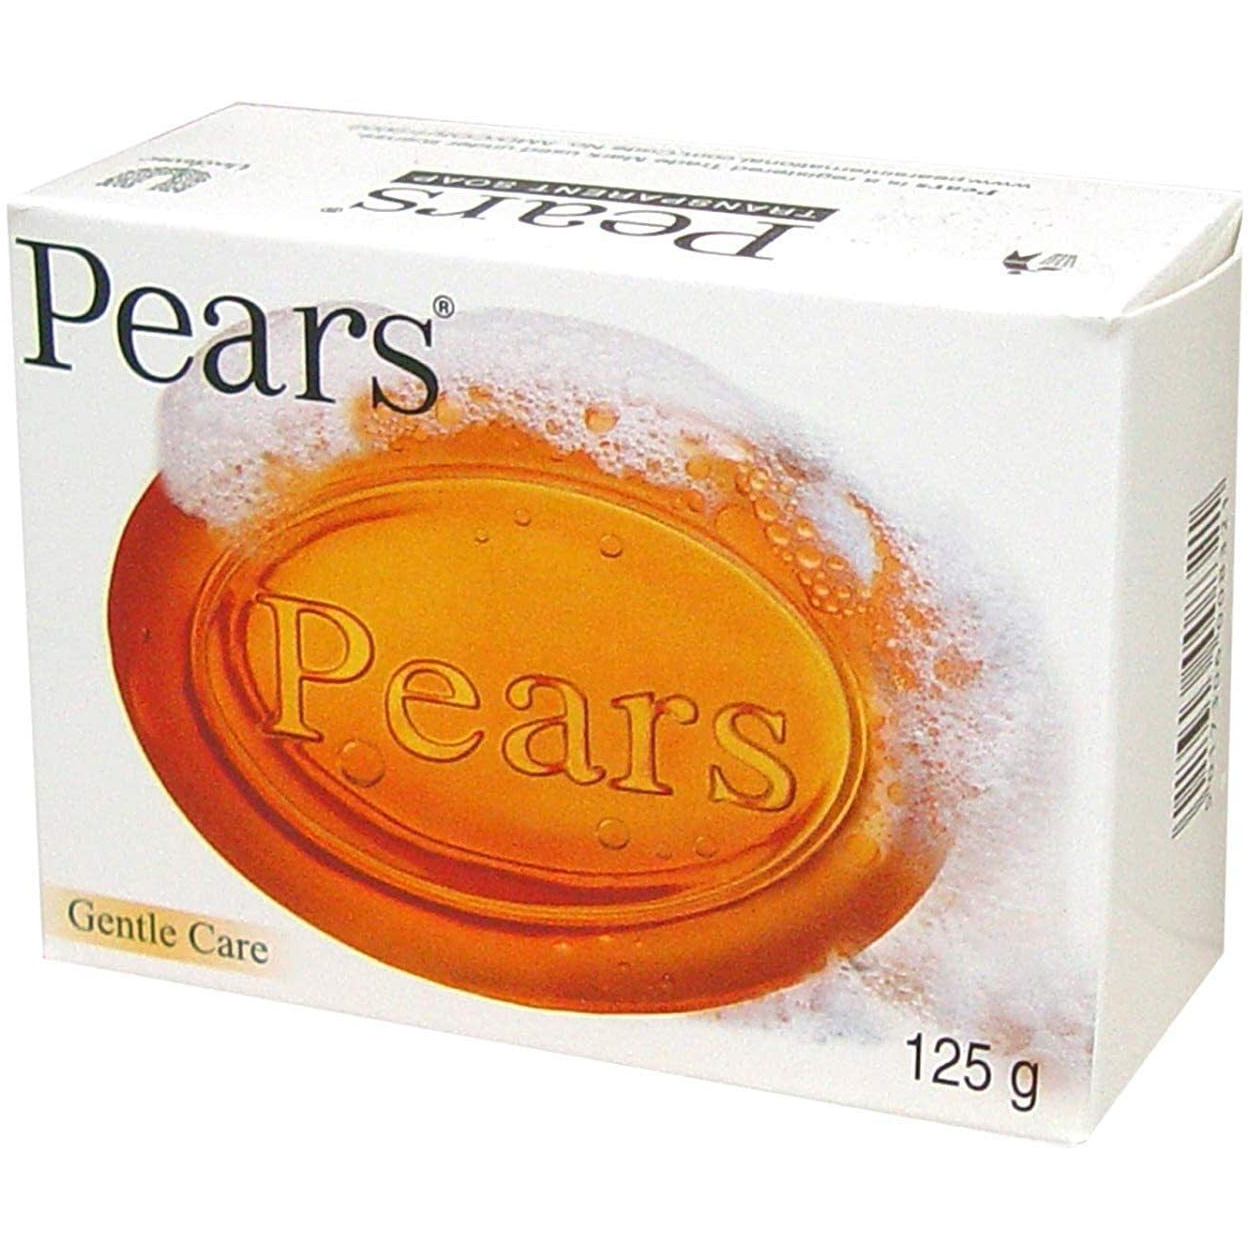 Pears Pure & Gentle Soap with Natural Oils 4.4 Oz. or 125G.